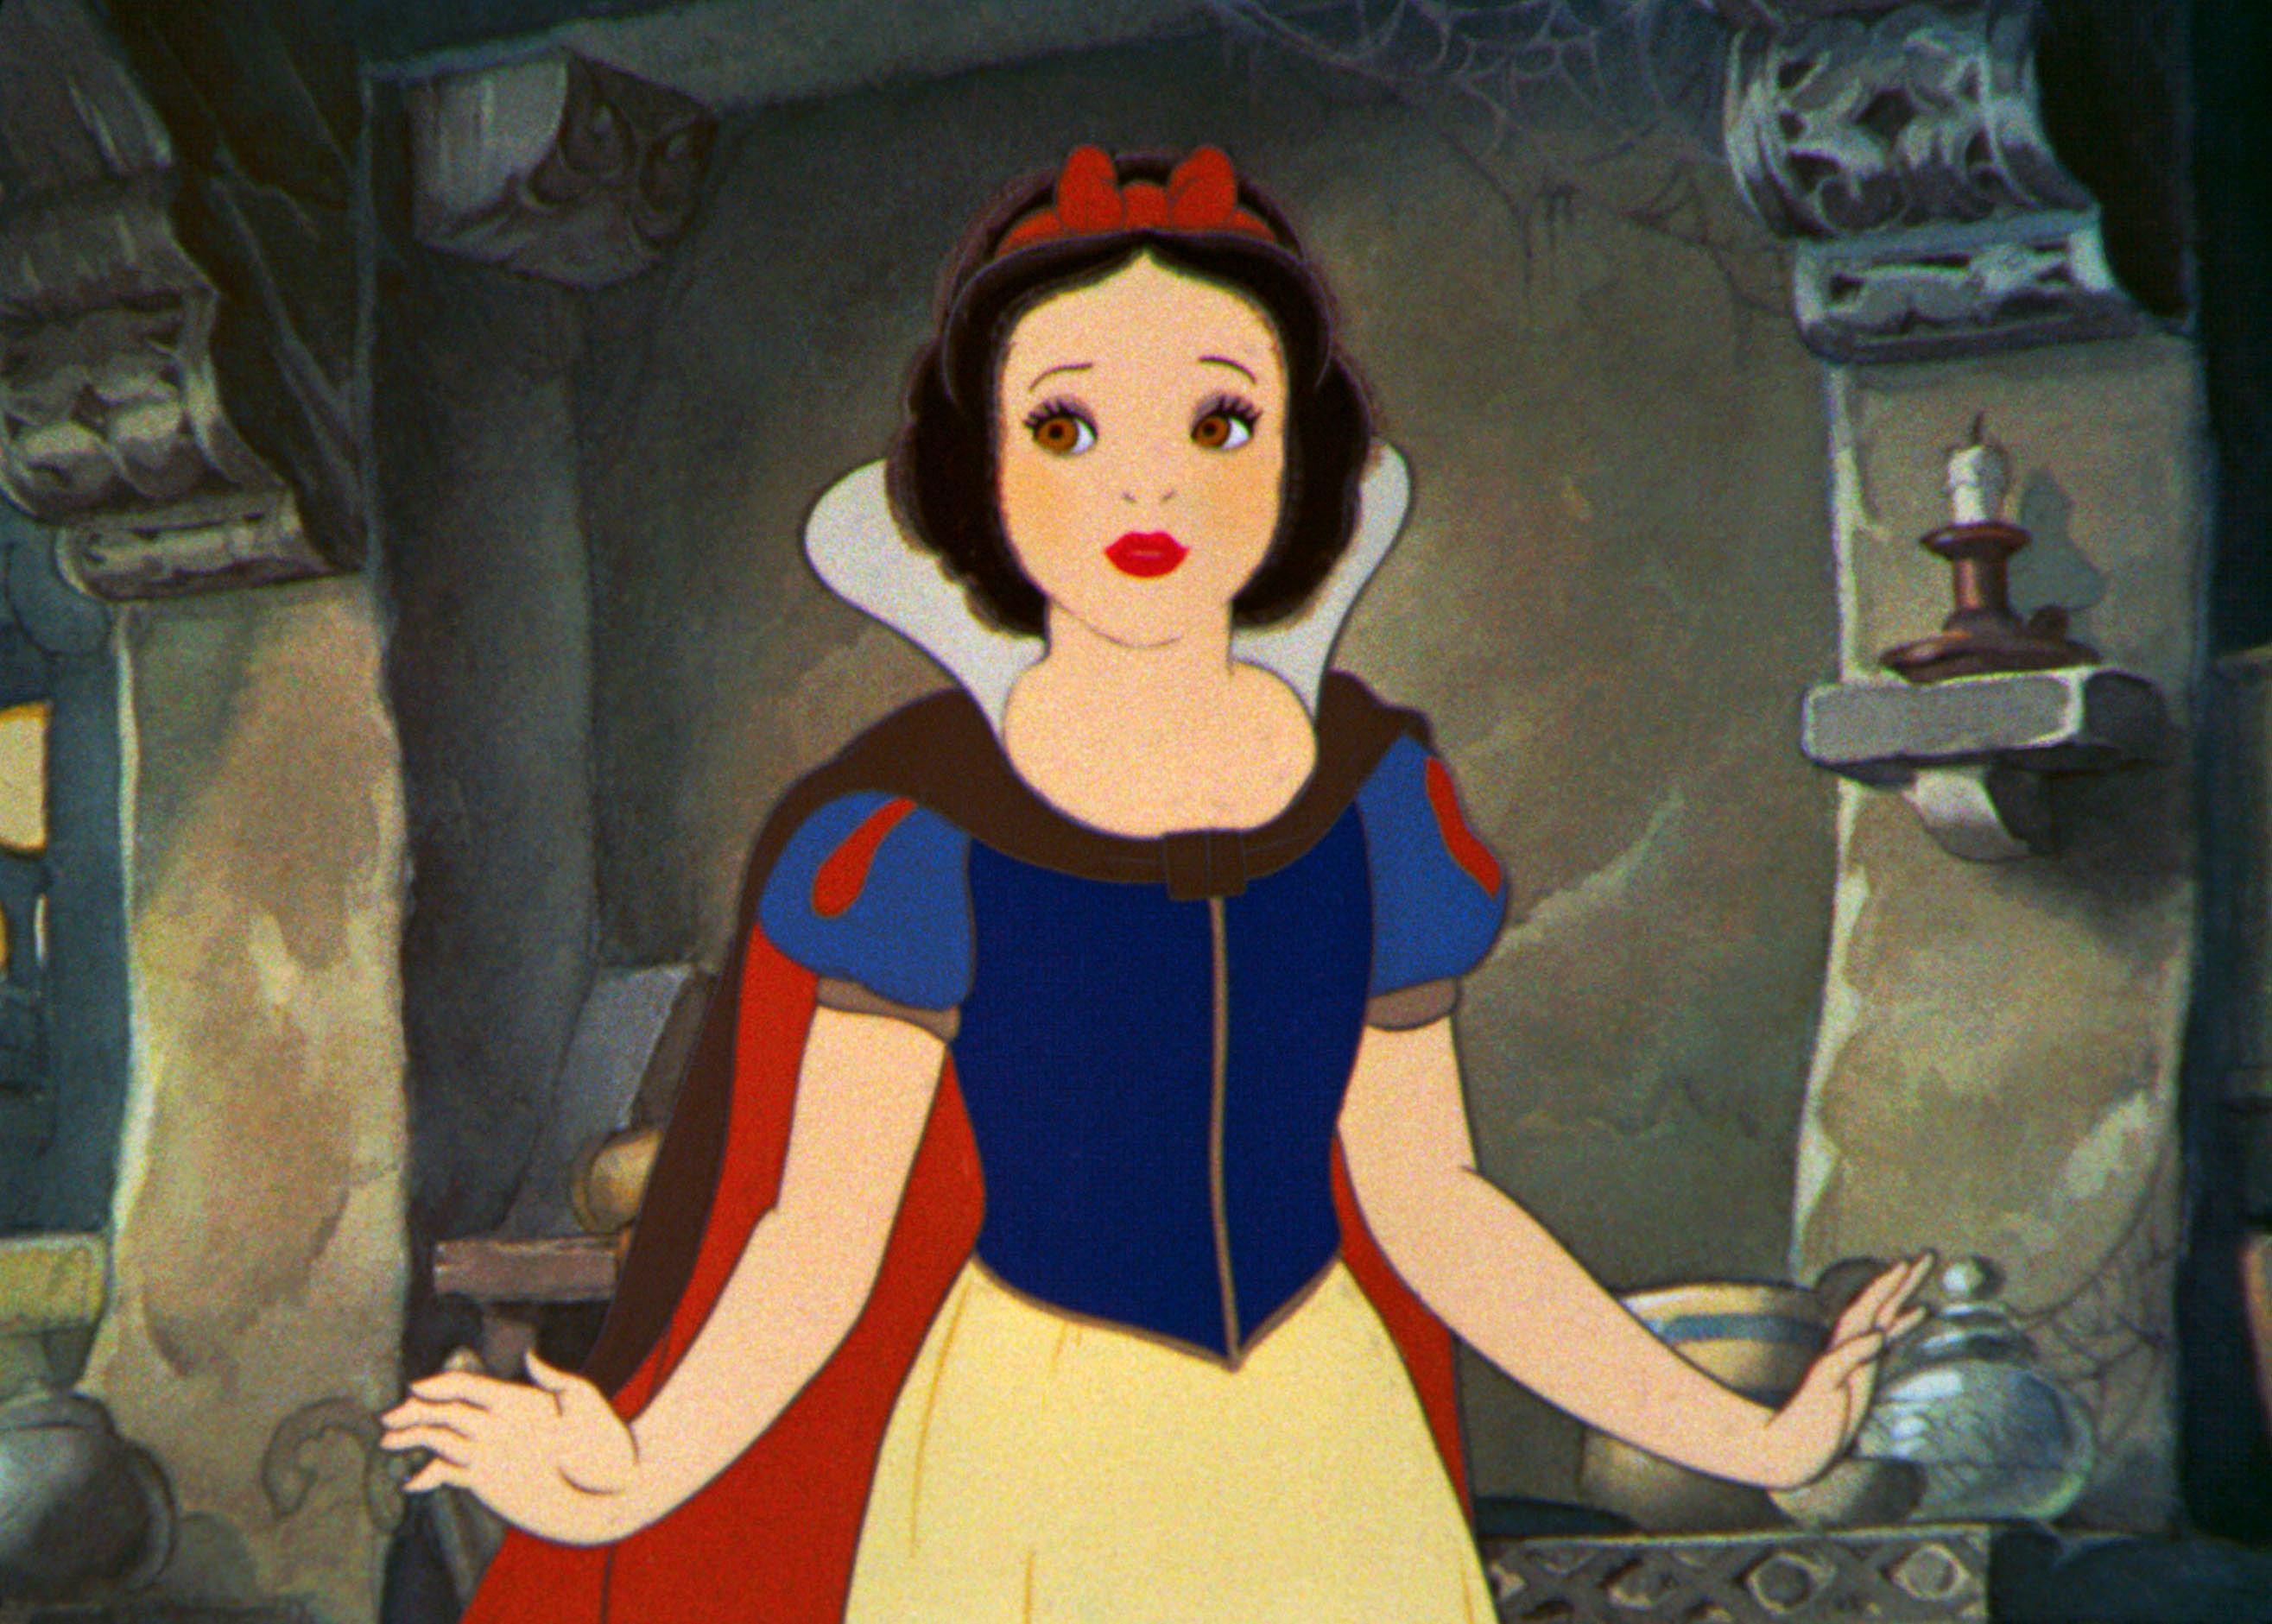 Snow White in the animated version of Snow White and the Seven Dwarfs